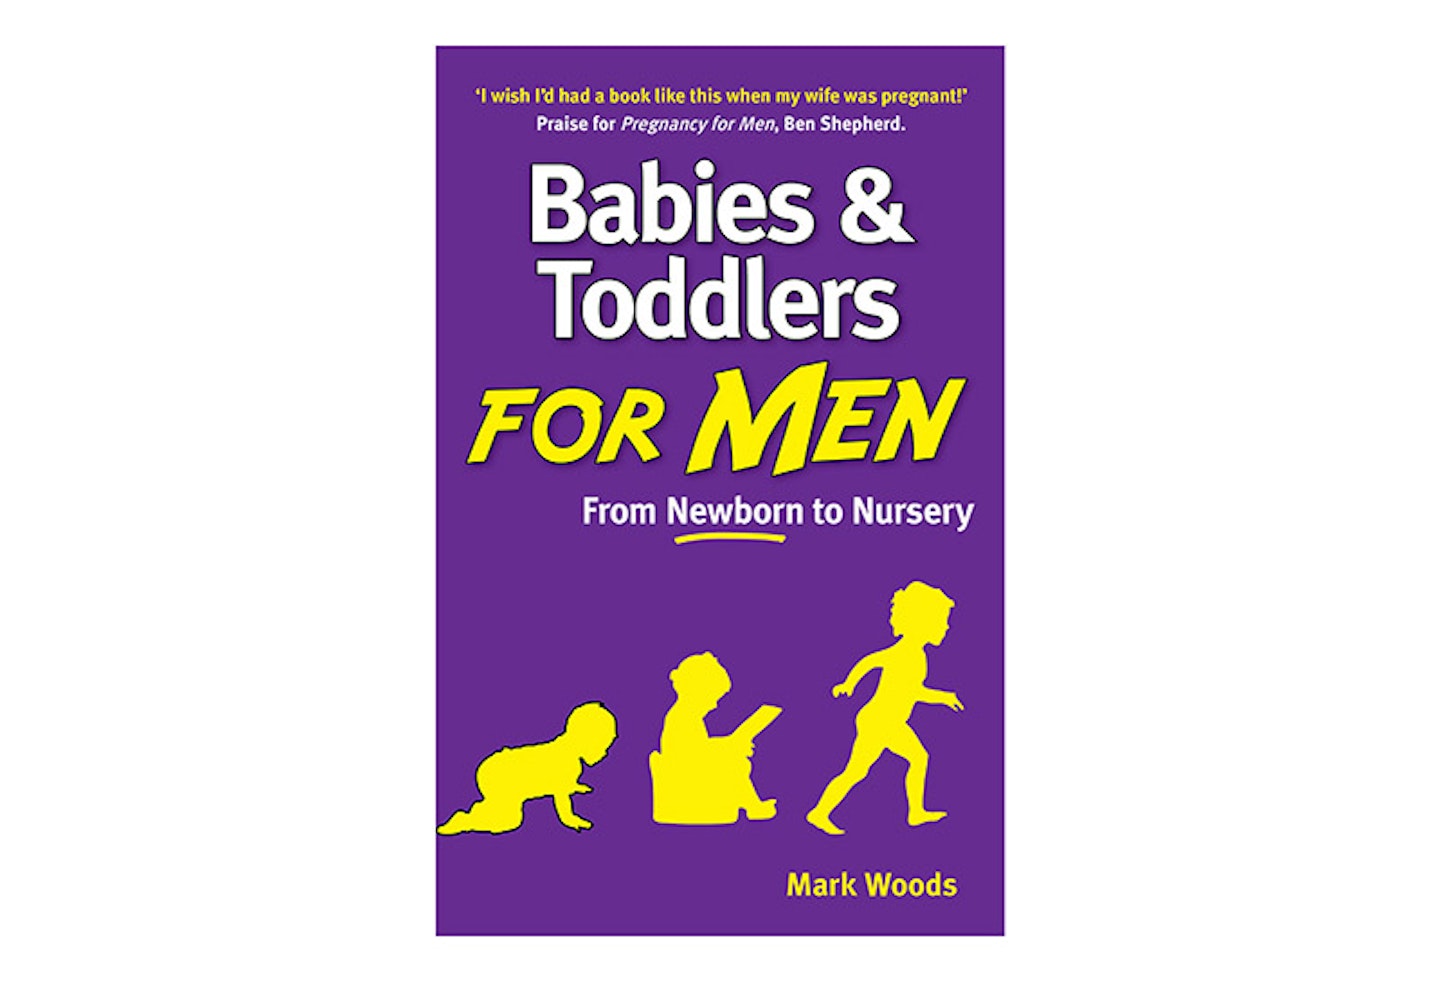 Babies & Toddlers For Men: From Newborn to Nursery